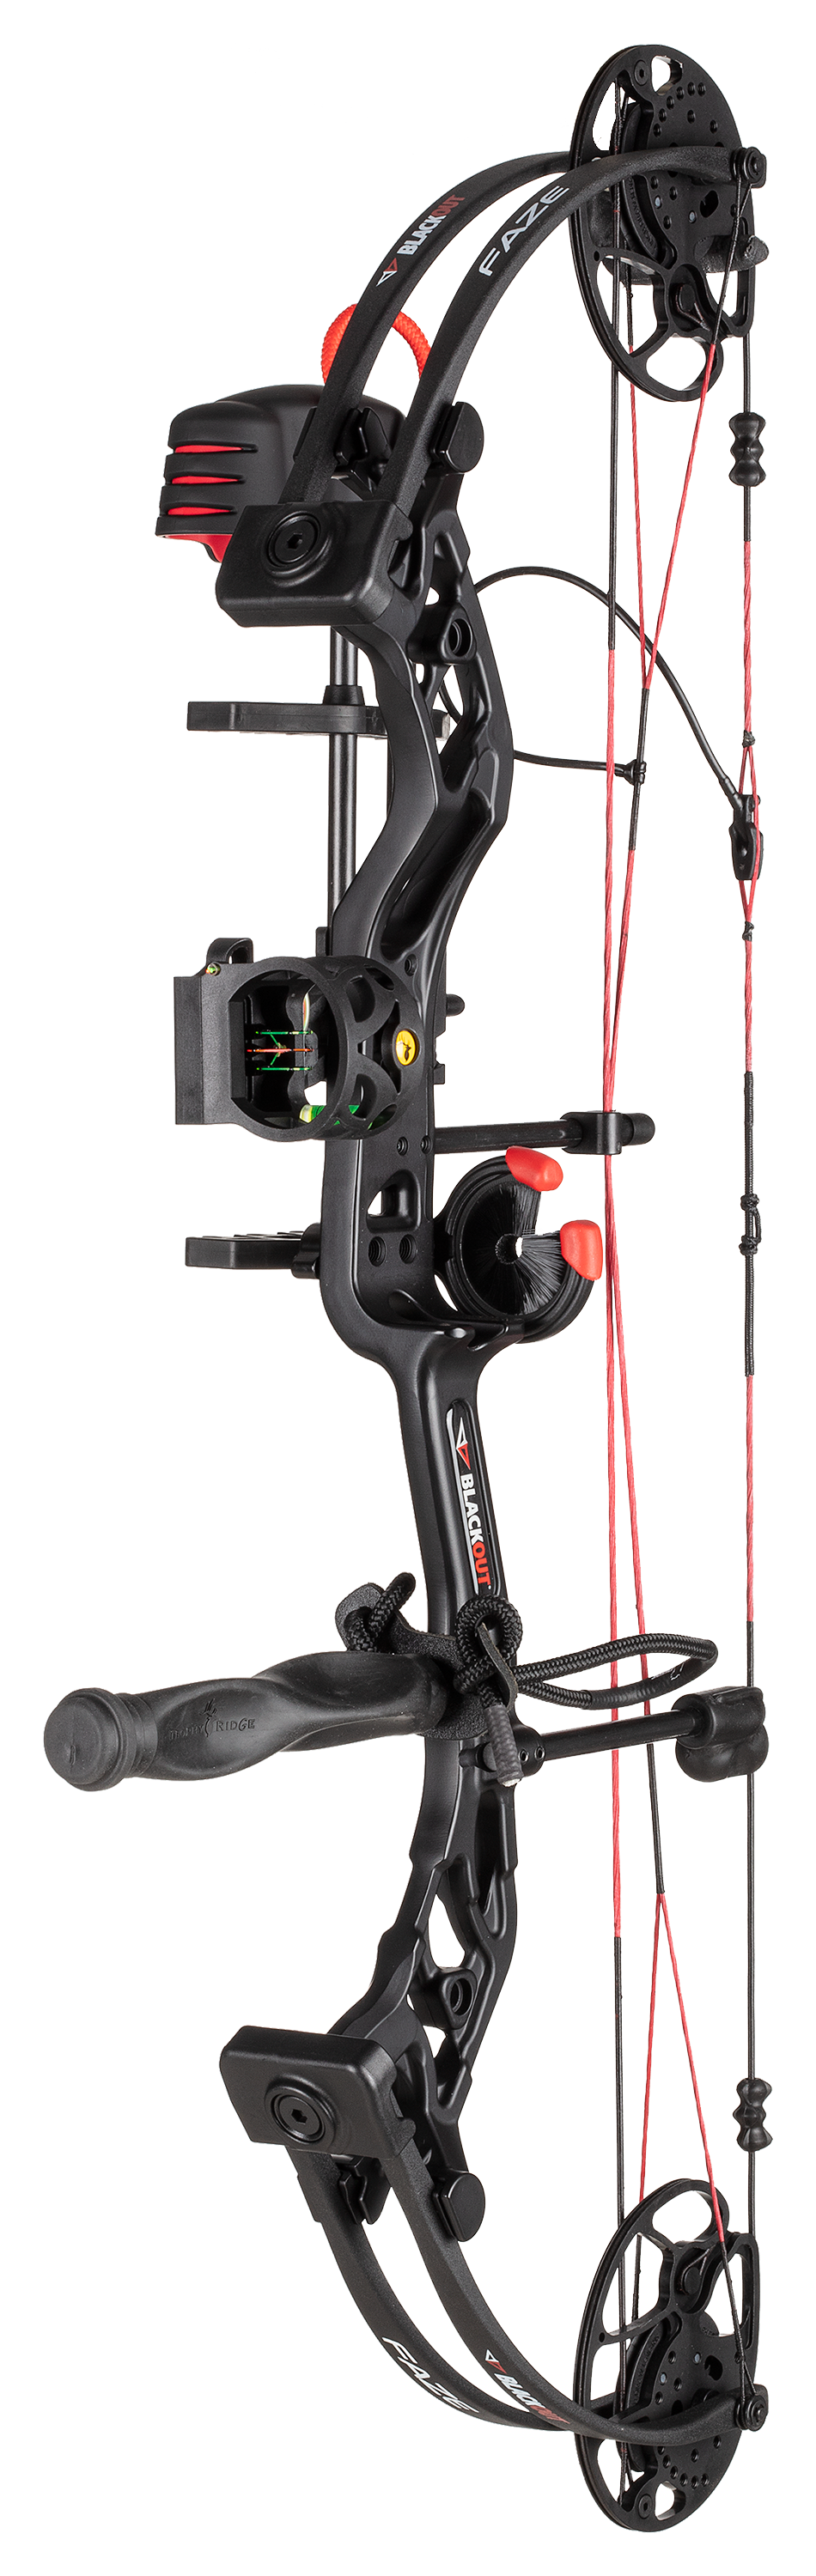 BlackOut Faze Compound Bow Package - Black - Right Hand